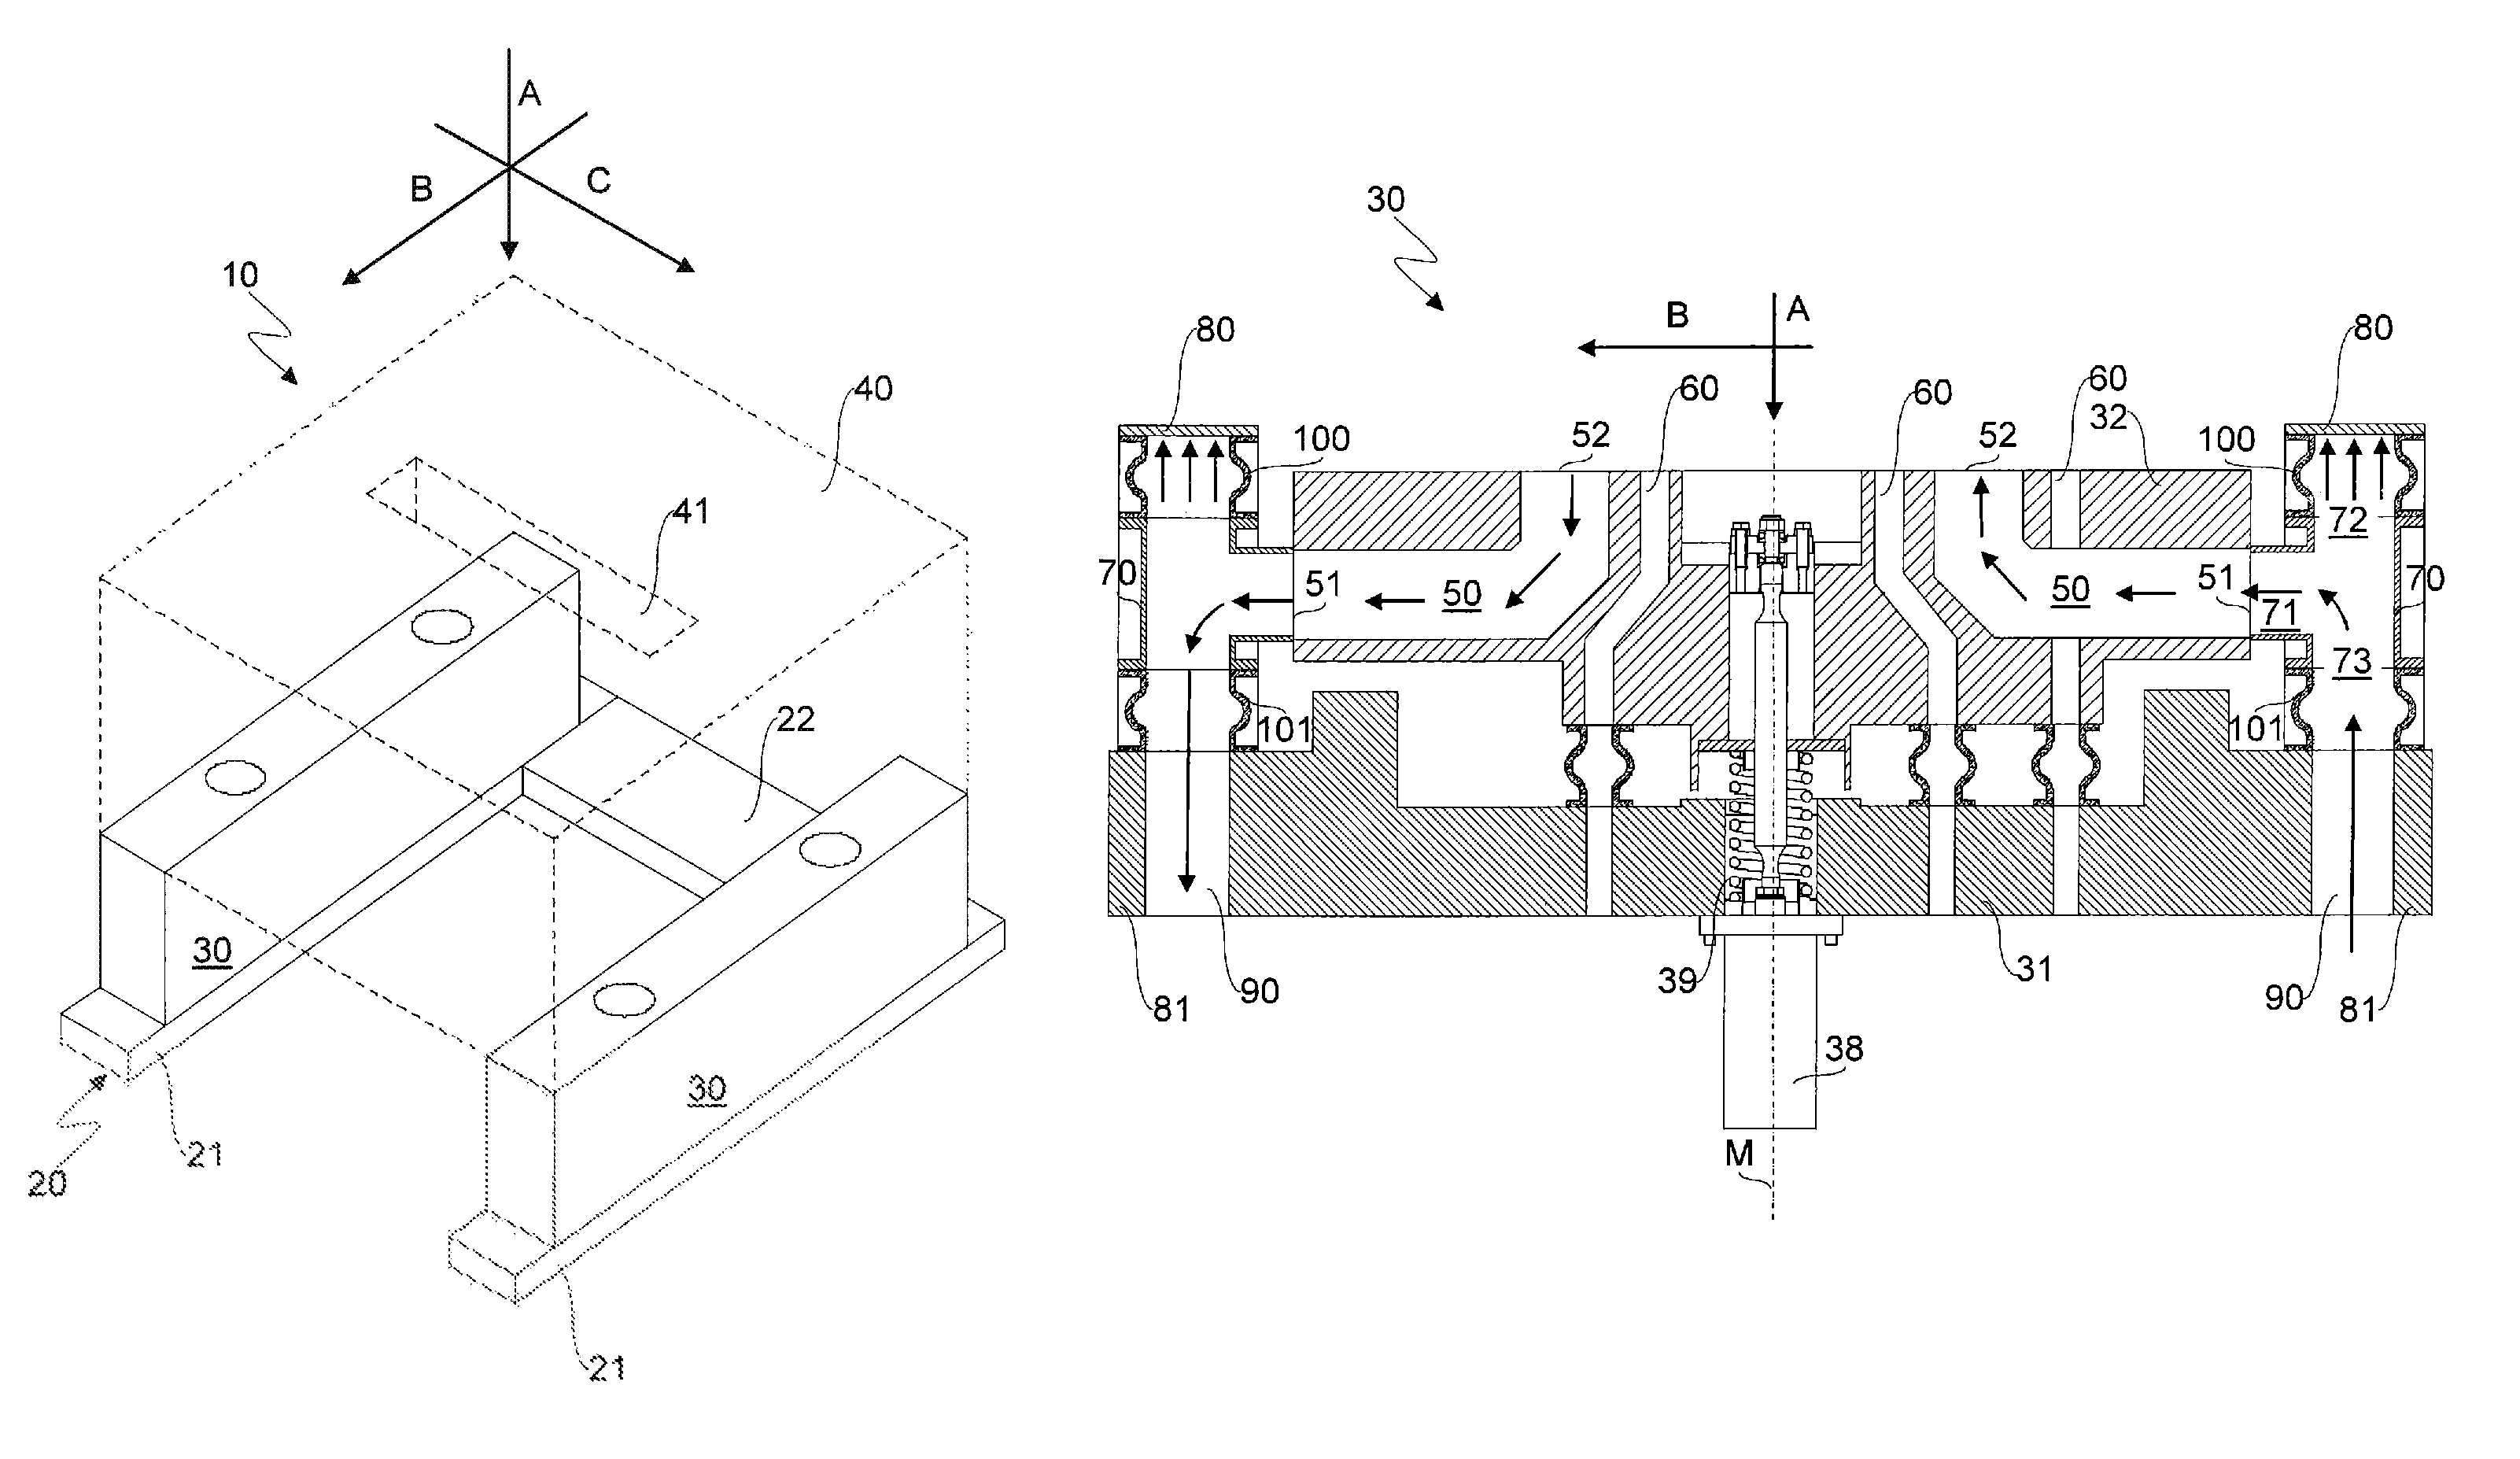 Device for supporting and oscillating continuous casting moulds in continuous casting plants